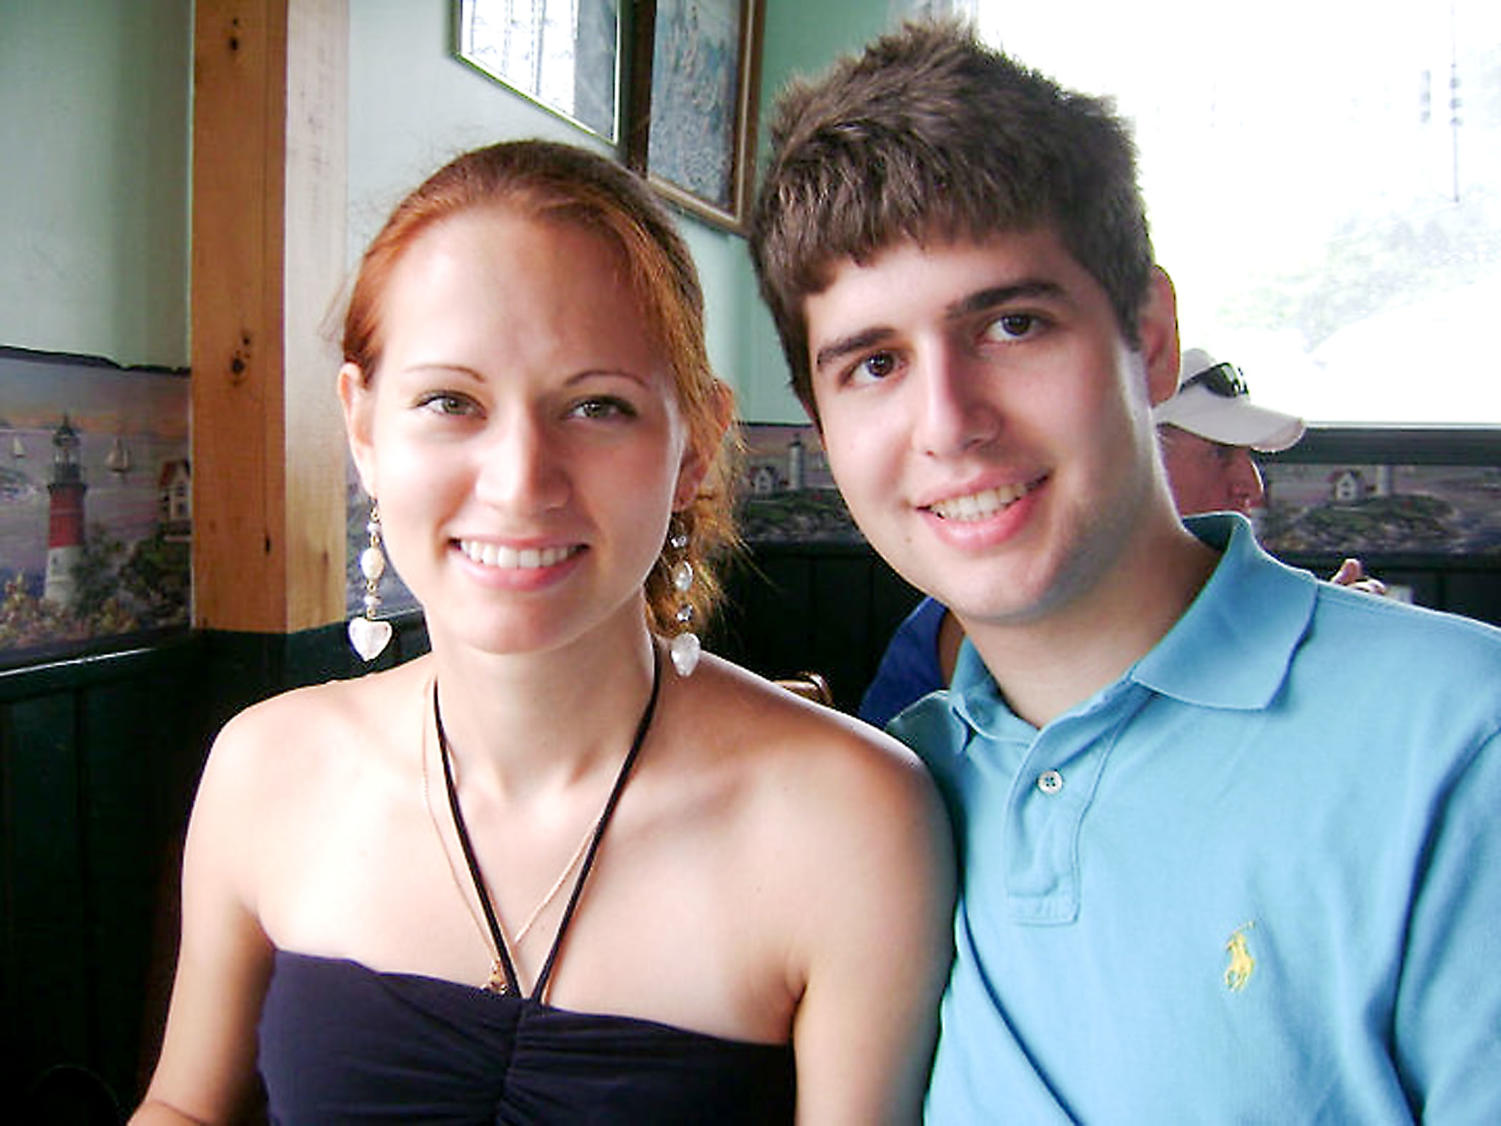 Tanya Alimova (A.B. '11) and her fiance fourth-year Daniel Straus in a restaurant in Chester, Nova Scotia.